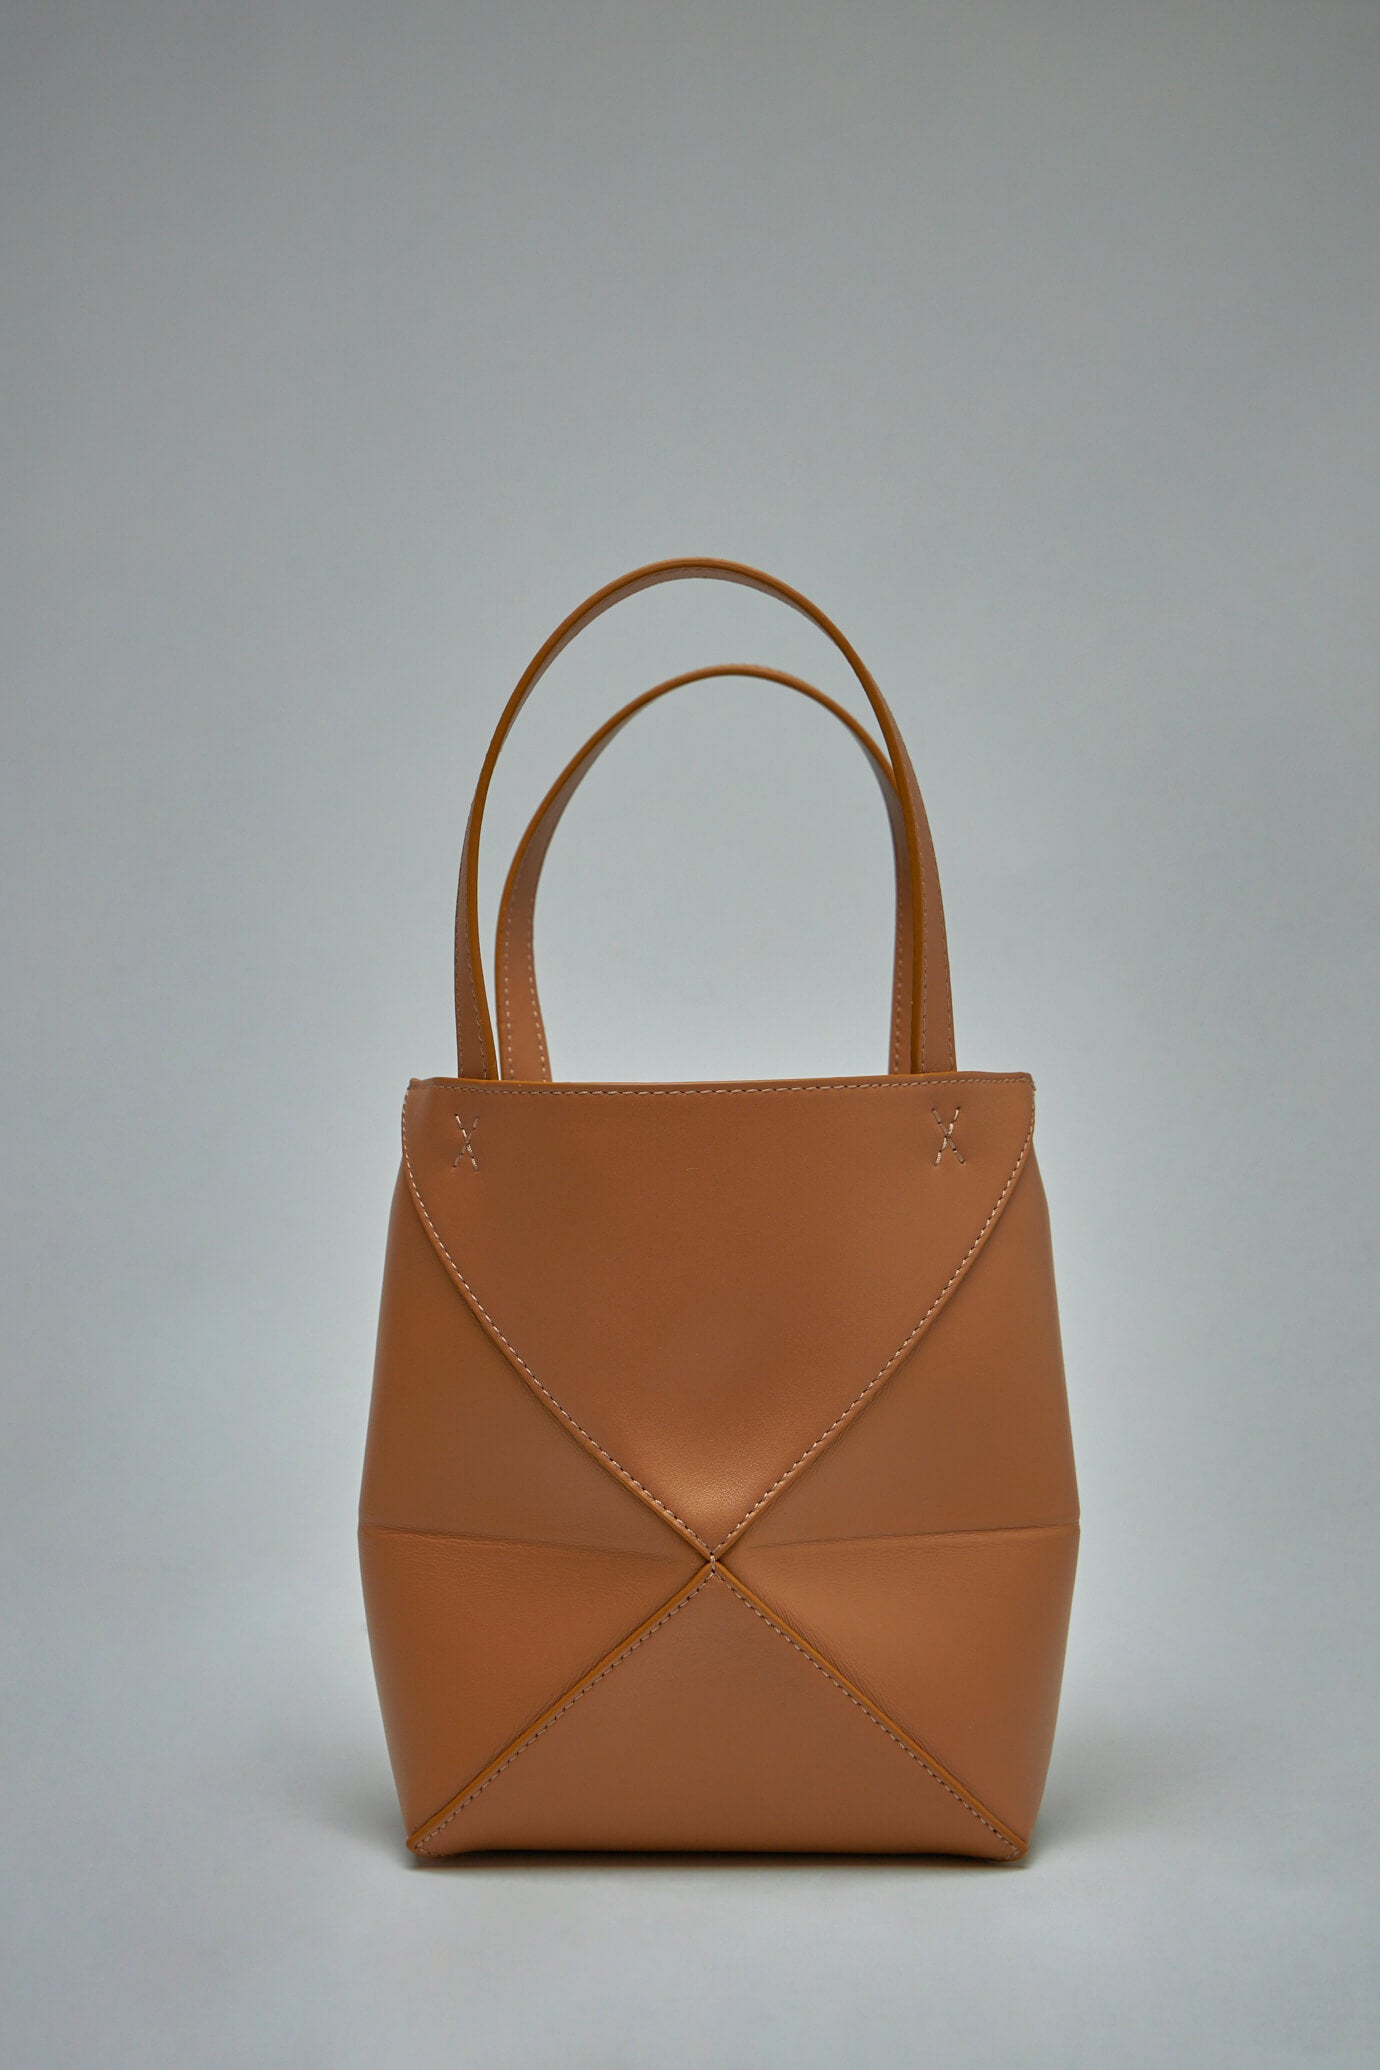 My first luxury bag! The new Loewe Mini Puzzle Fold Tote in Warm